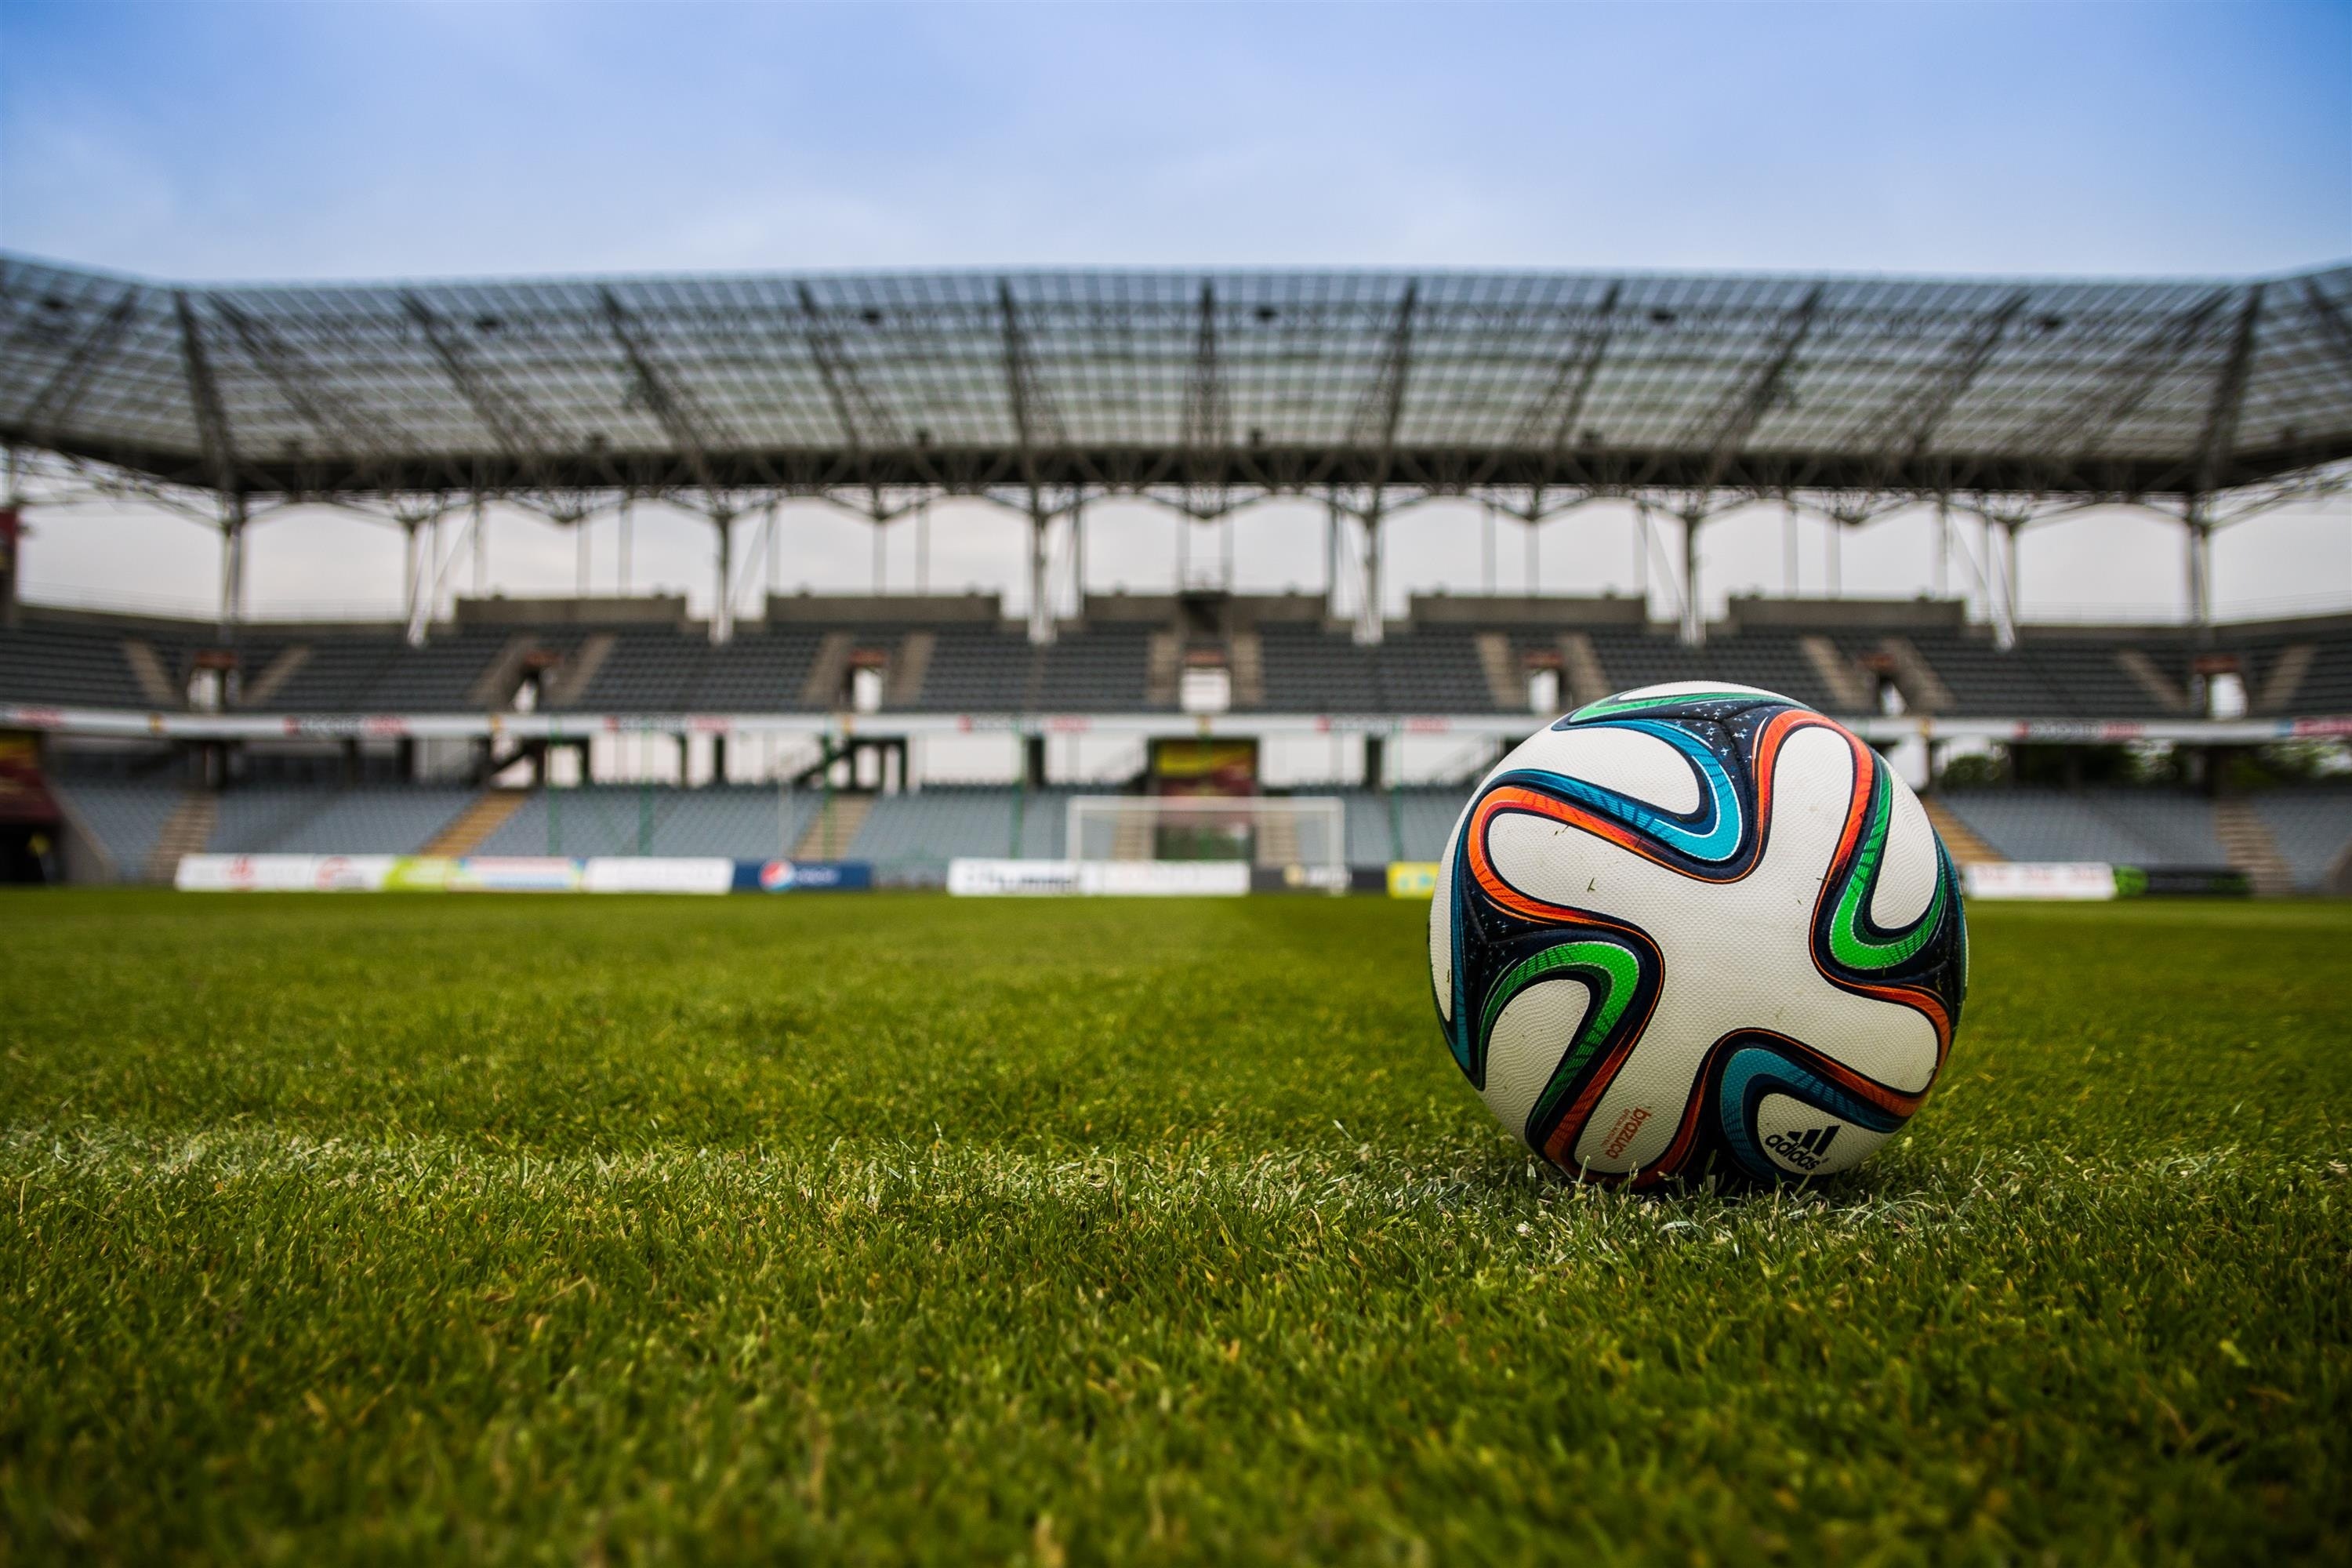 soccer ball on grass field during daytime 46798